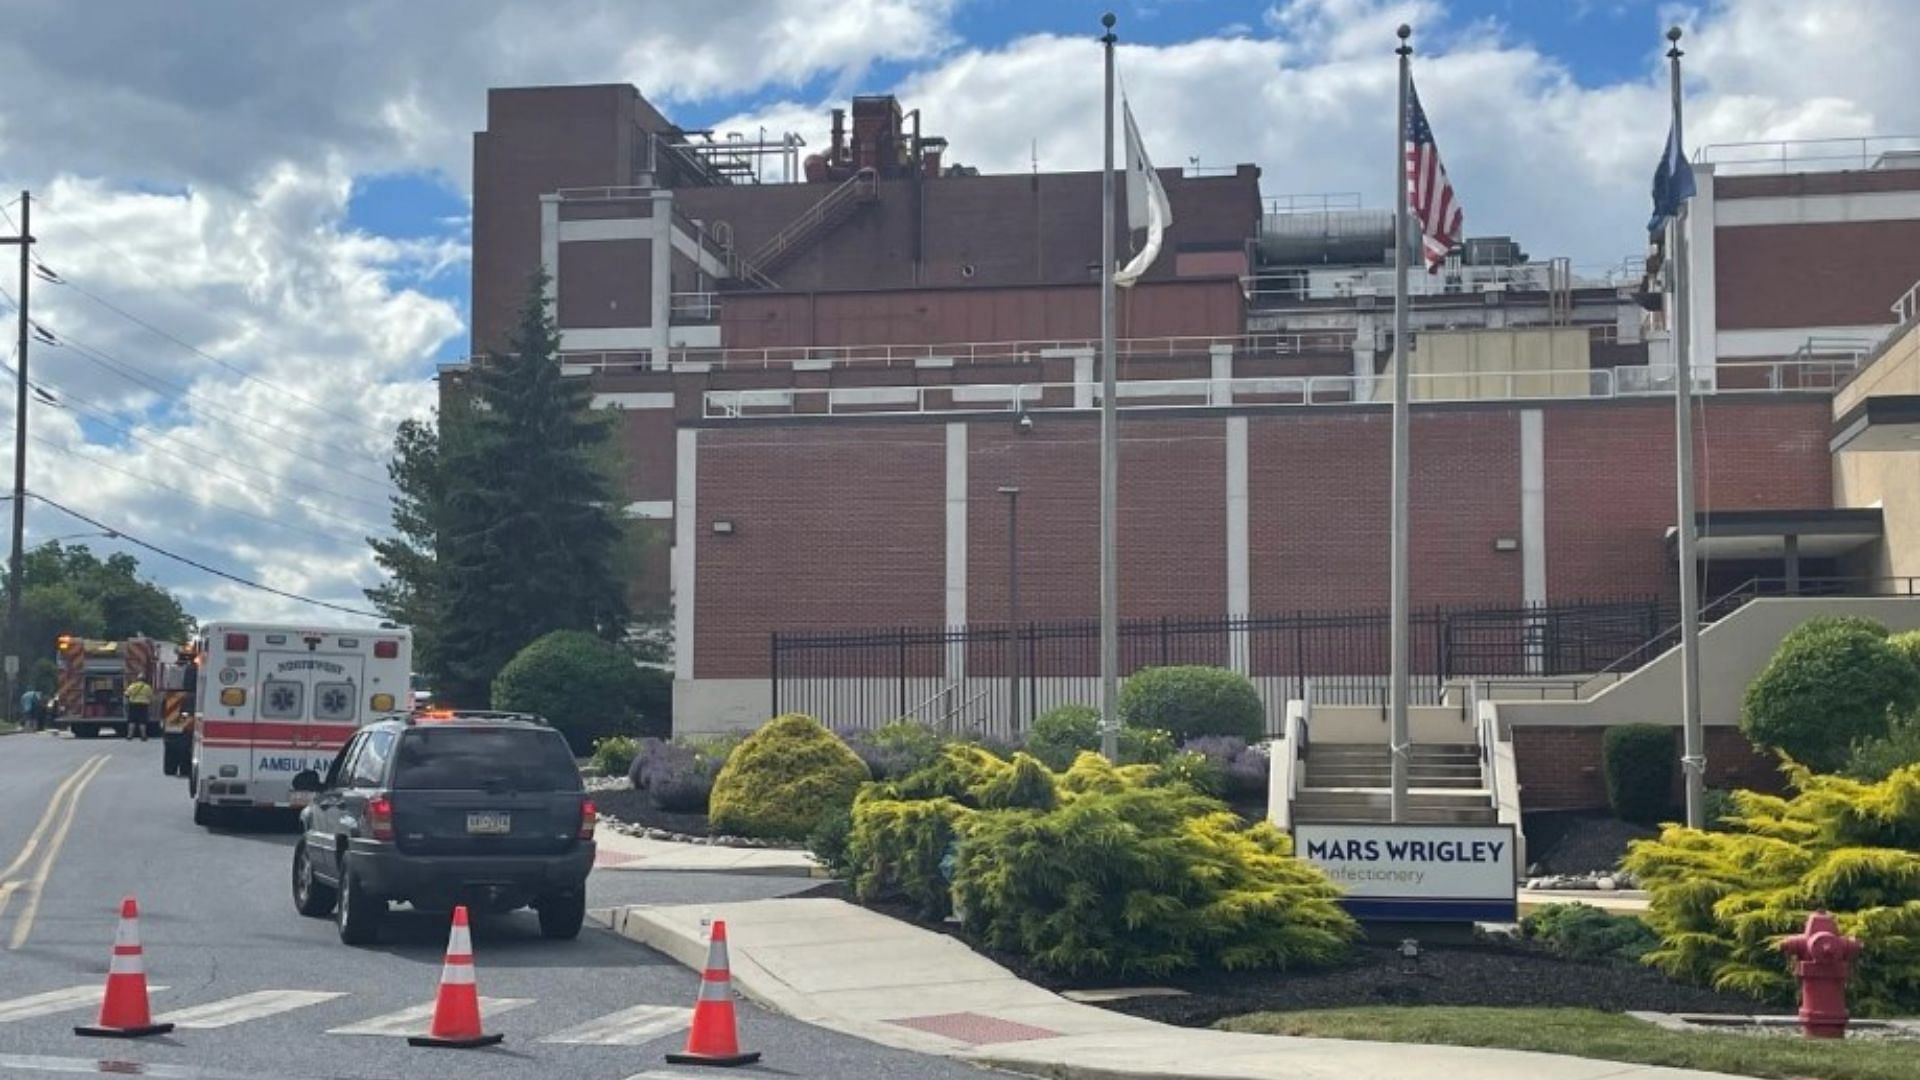 Two workers were hospitalized after falling into a chocolate tank at a Pennsylvania Mars M&amp;M factory on June 9 (Image via ABC27)